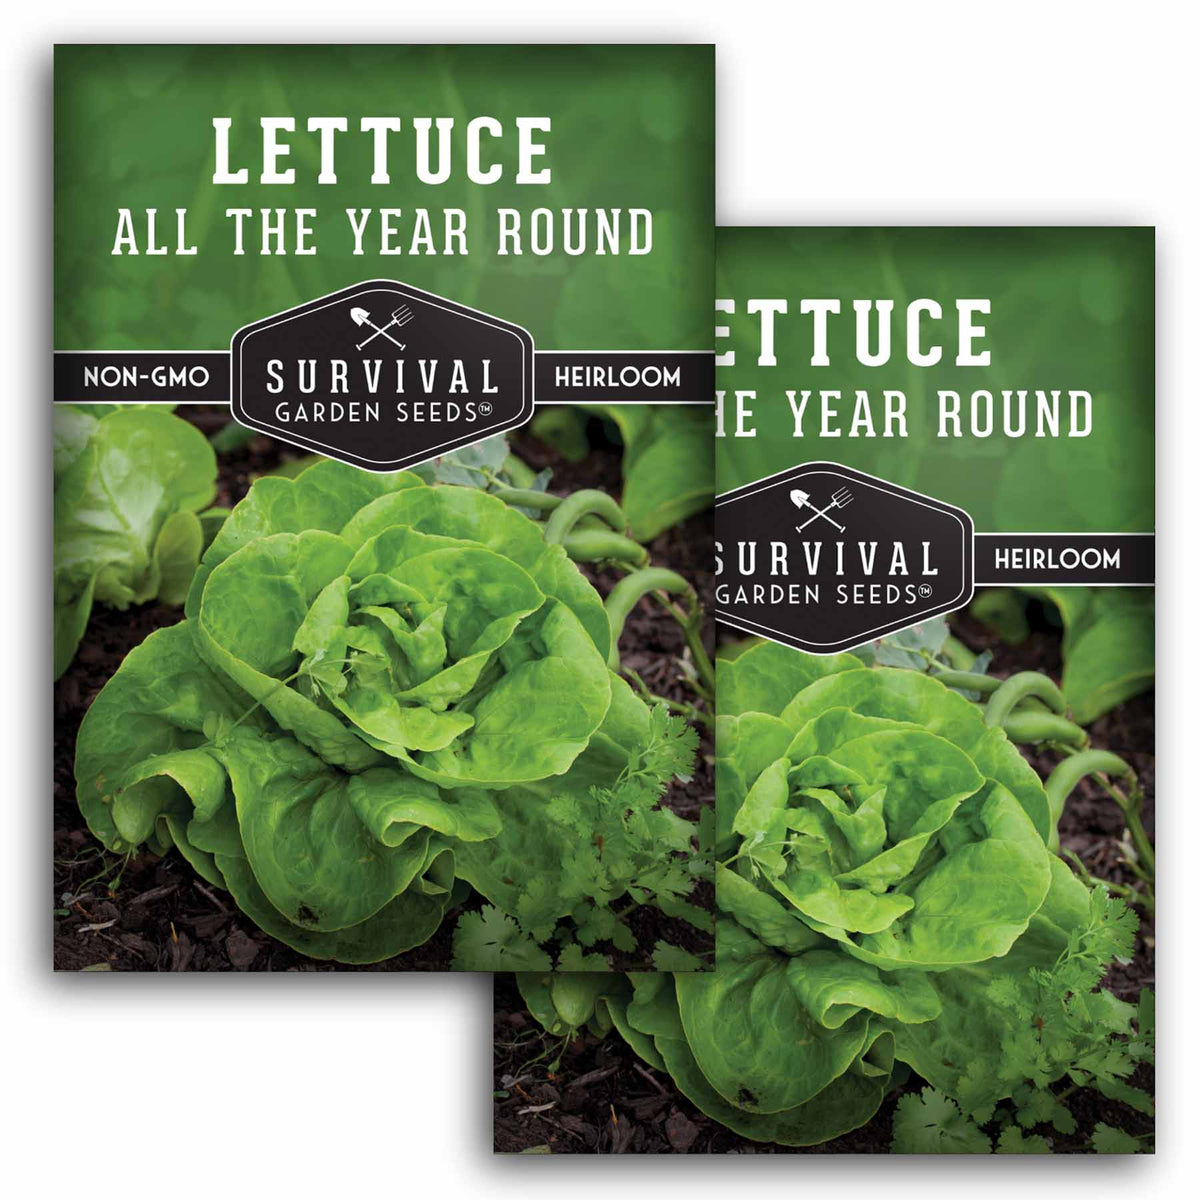 2 packets of All the Year Round Lettuce seeds